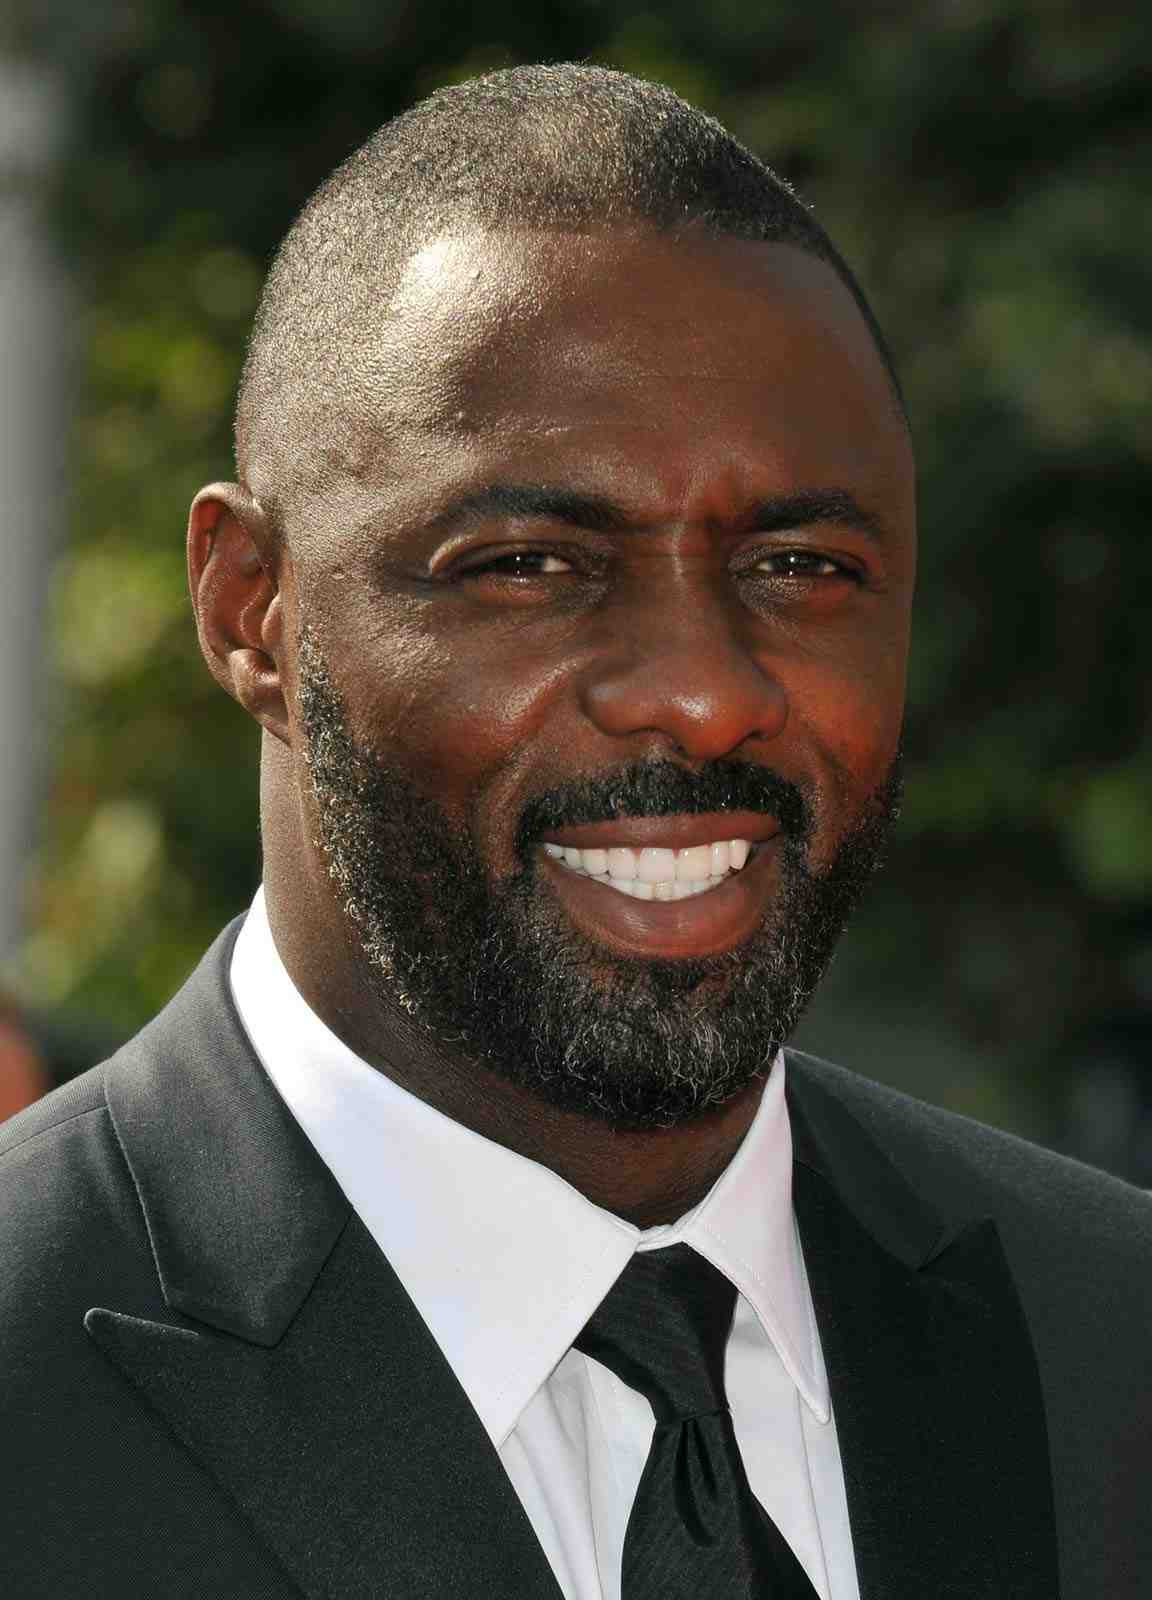 At the "Idris Elba height" of fame, yet no 007 role? Uncover the Bond-Elba connection, Hollywood's biases, and why Idris doesn't need that tux to turn heads.